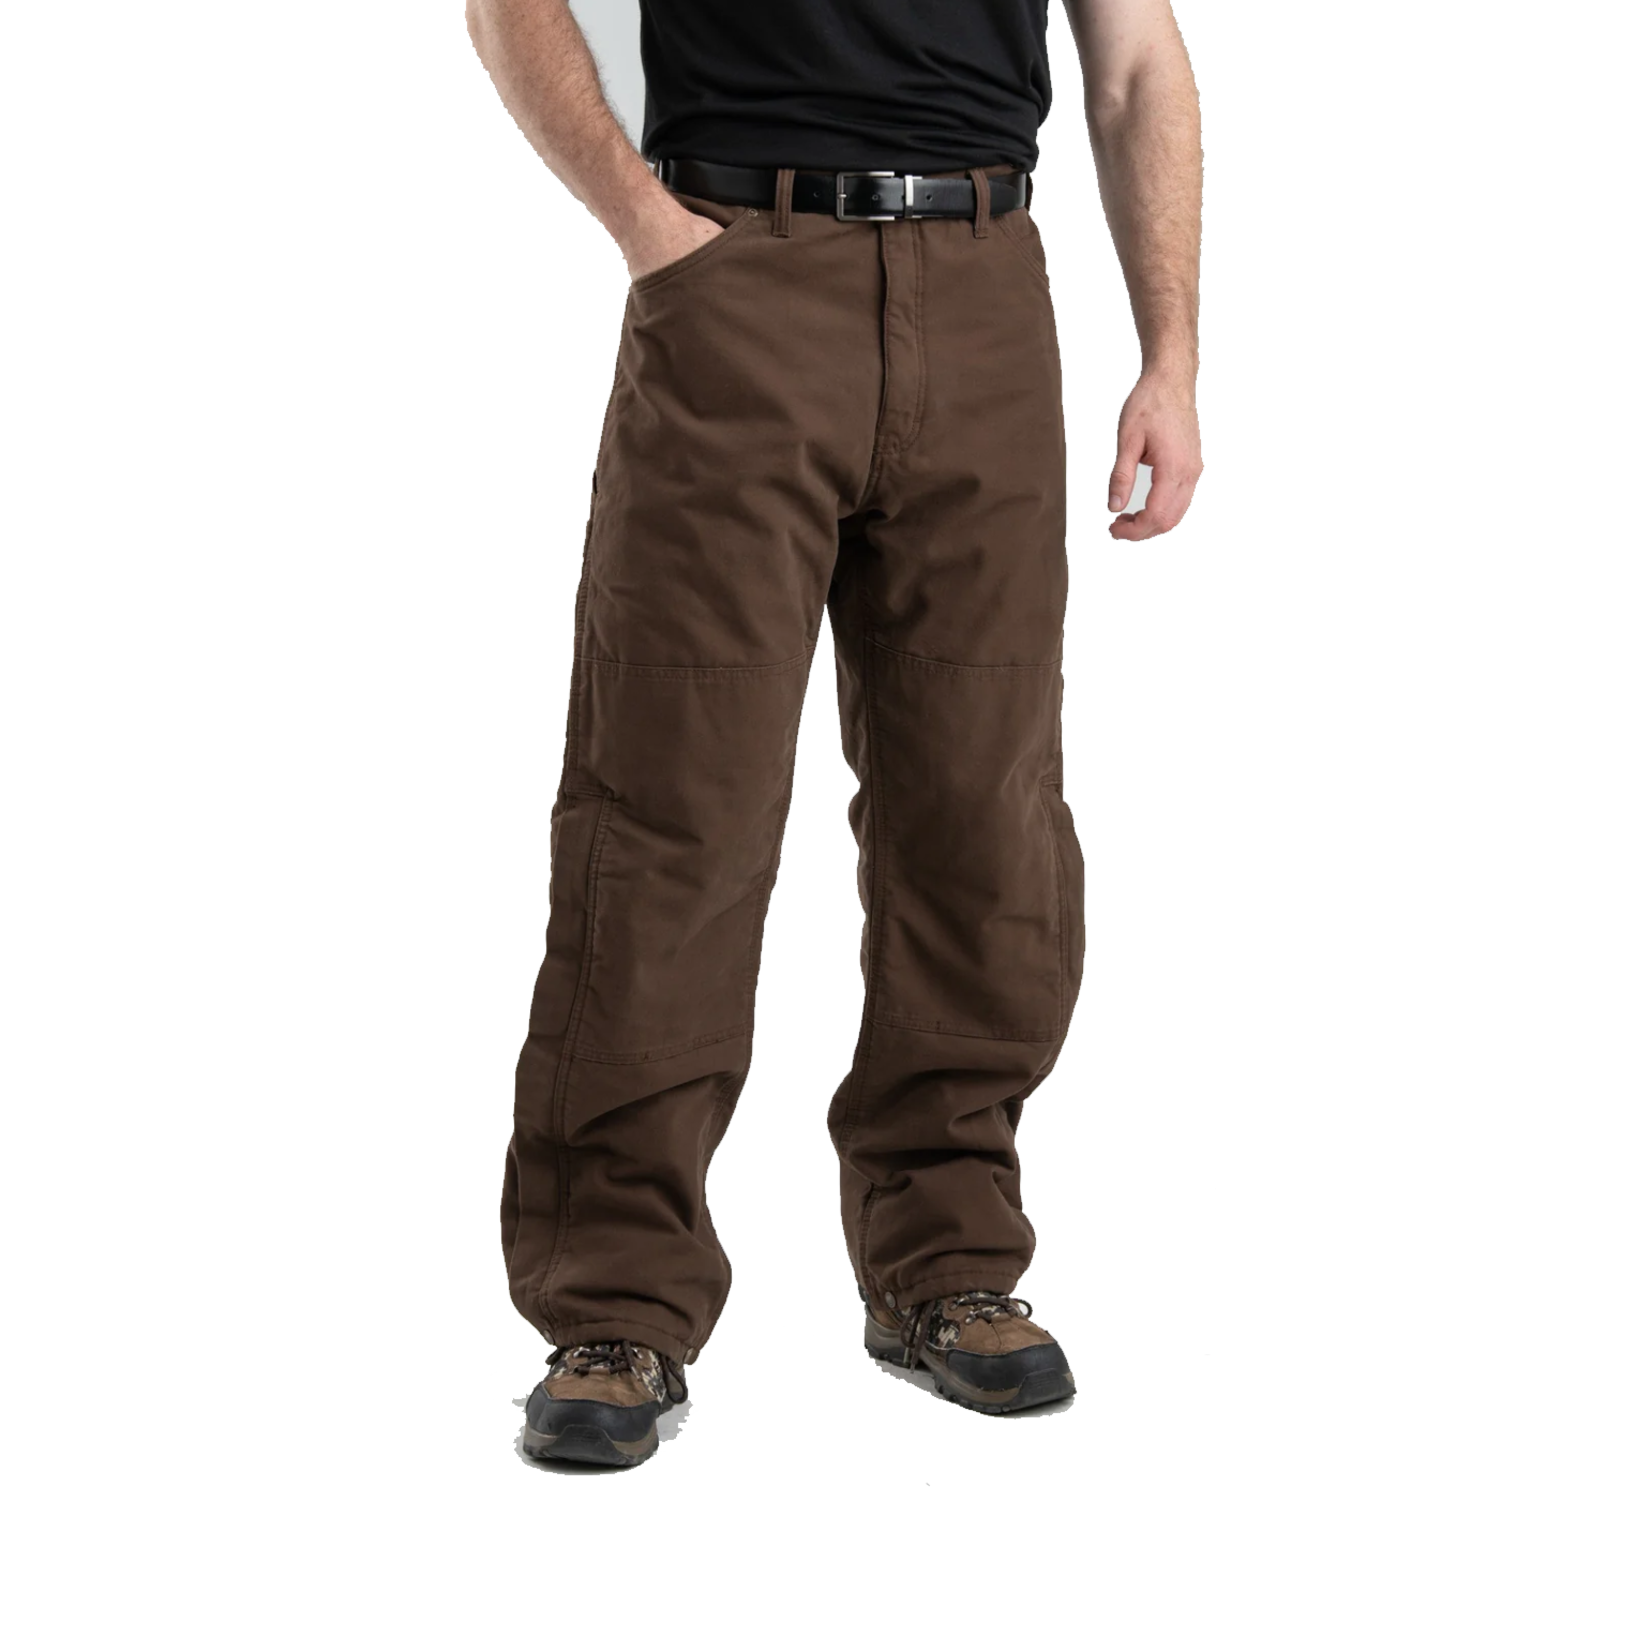 Berne Highland Washed Duck Insulated Outer Pant